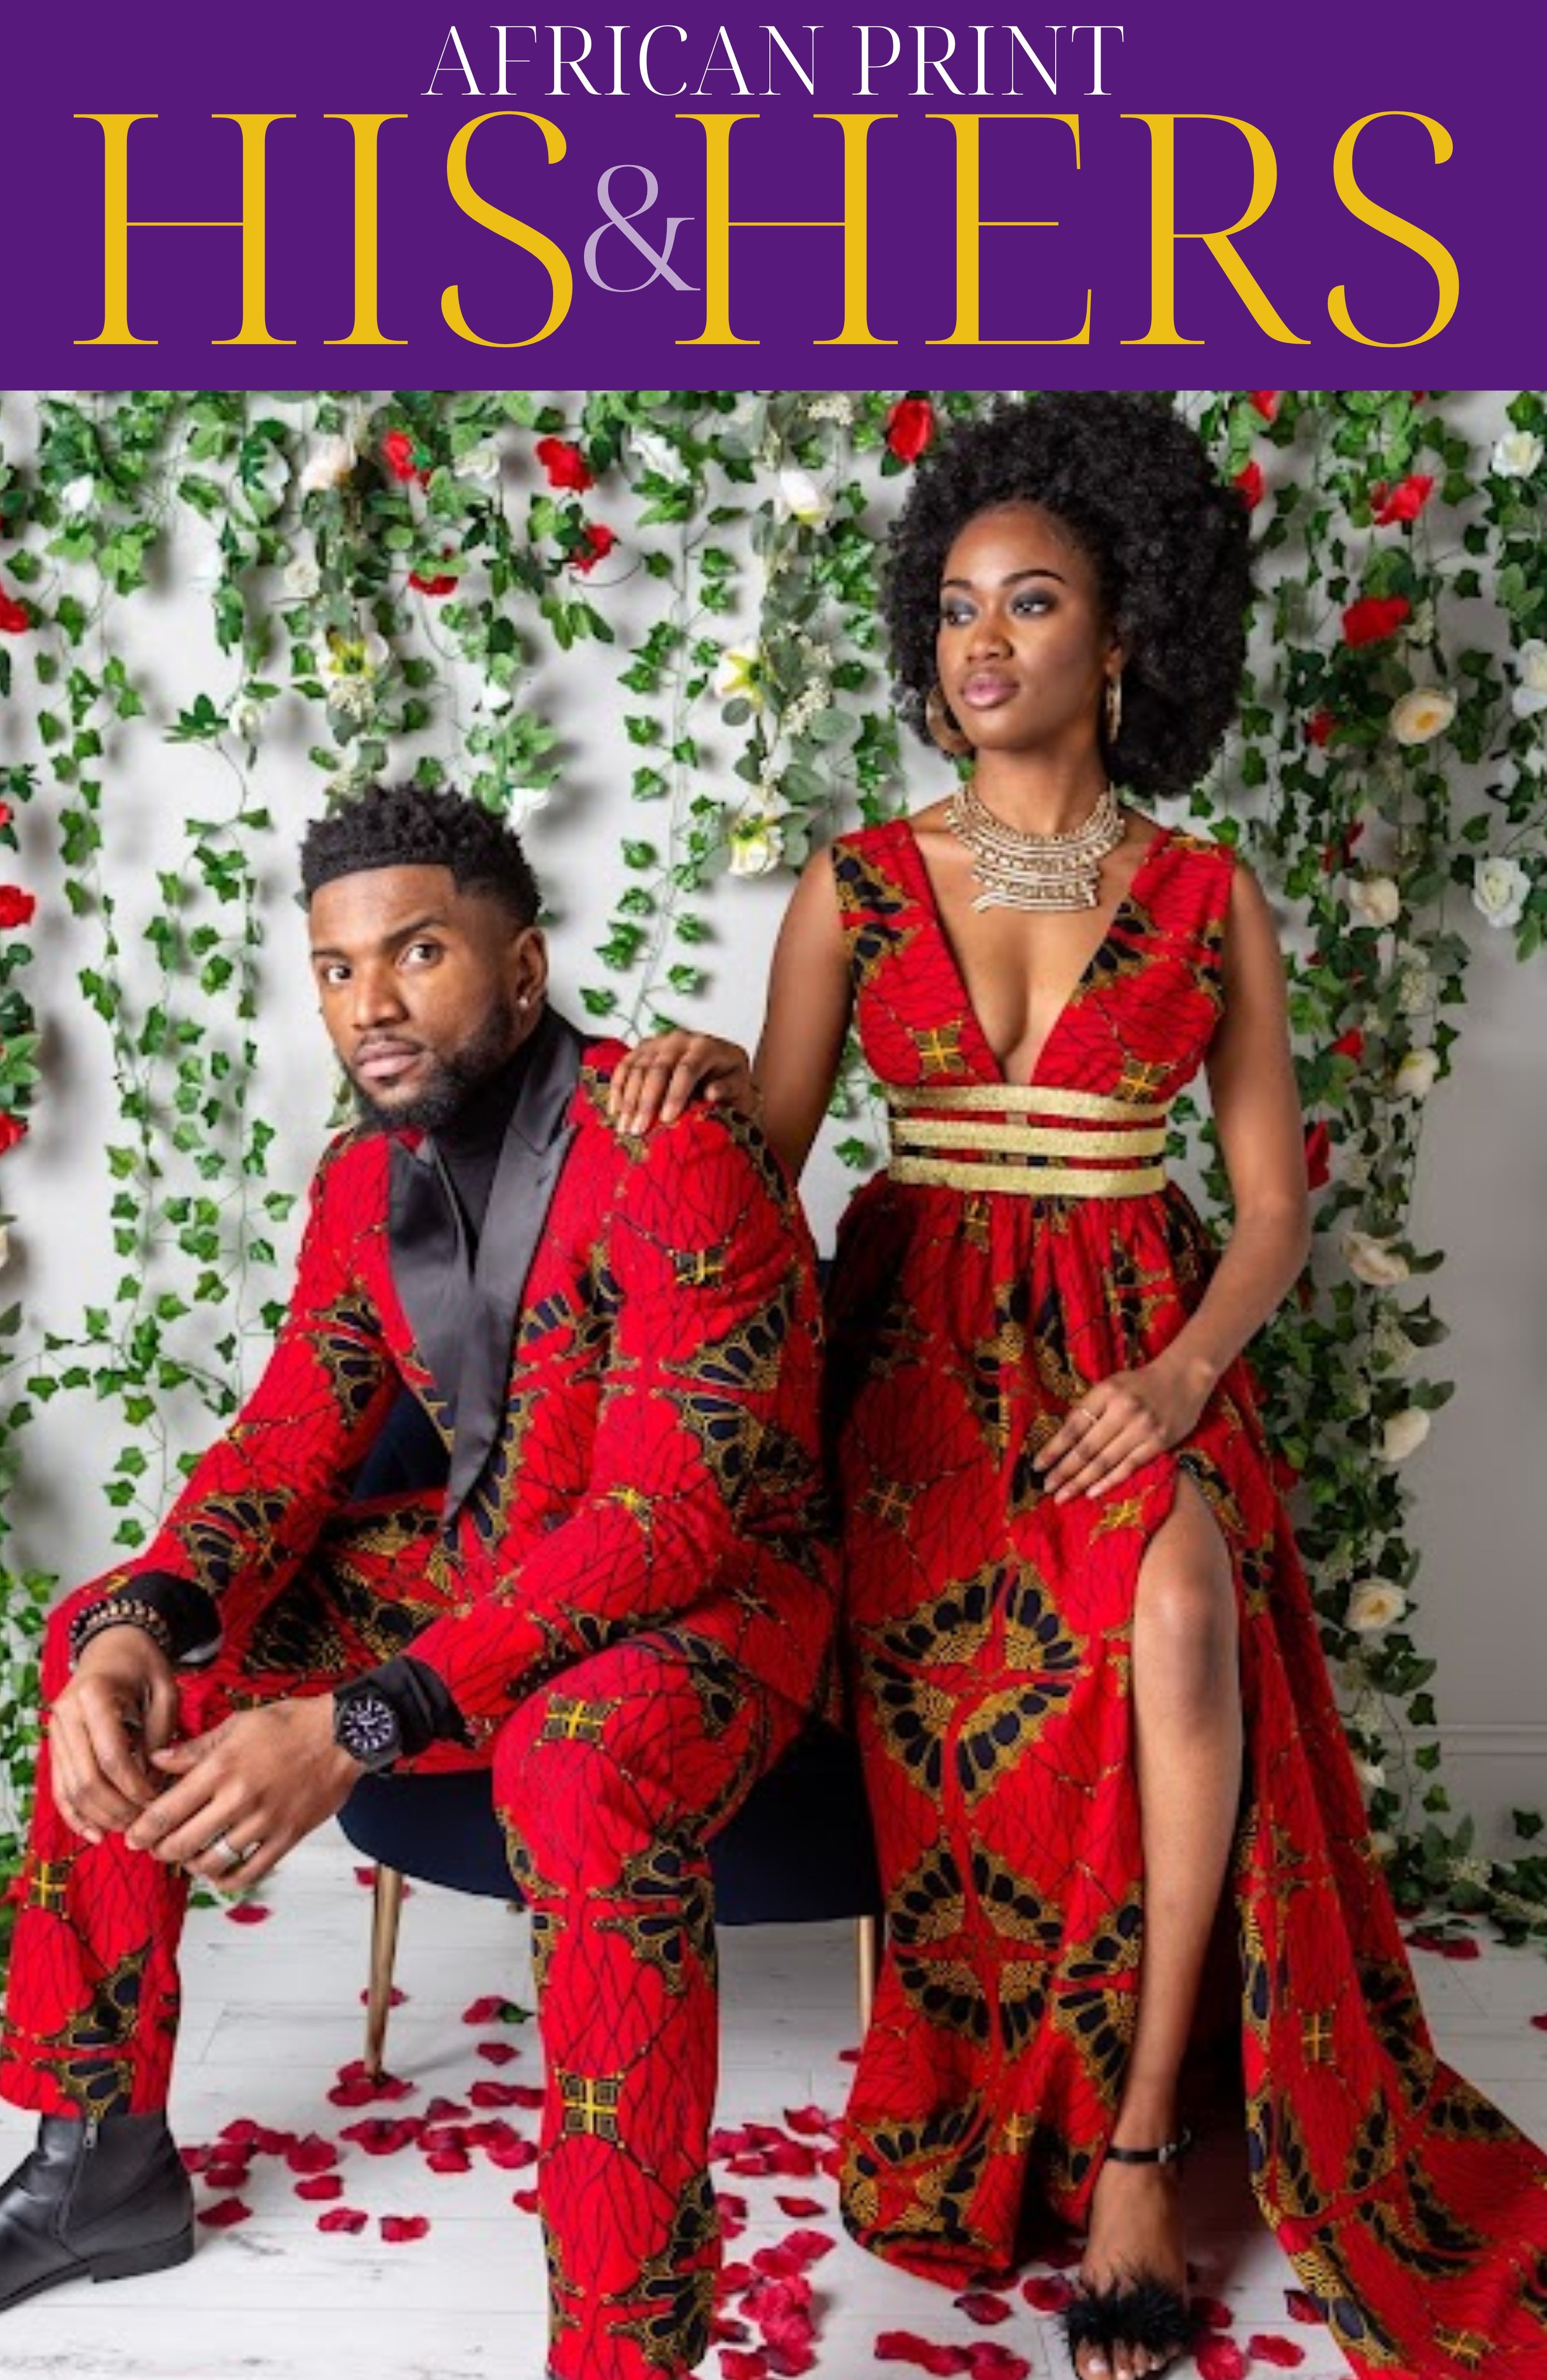 African Couples Matching Outfit, African Couples Clothing,african Print  Couples Clothing for Photoshoot, Couples Engagement Matching Outfits 